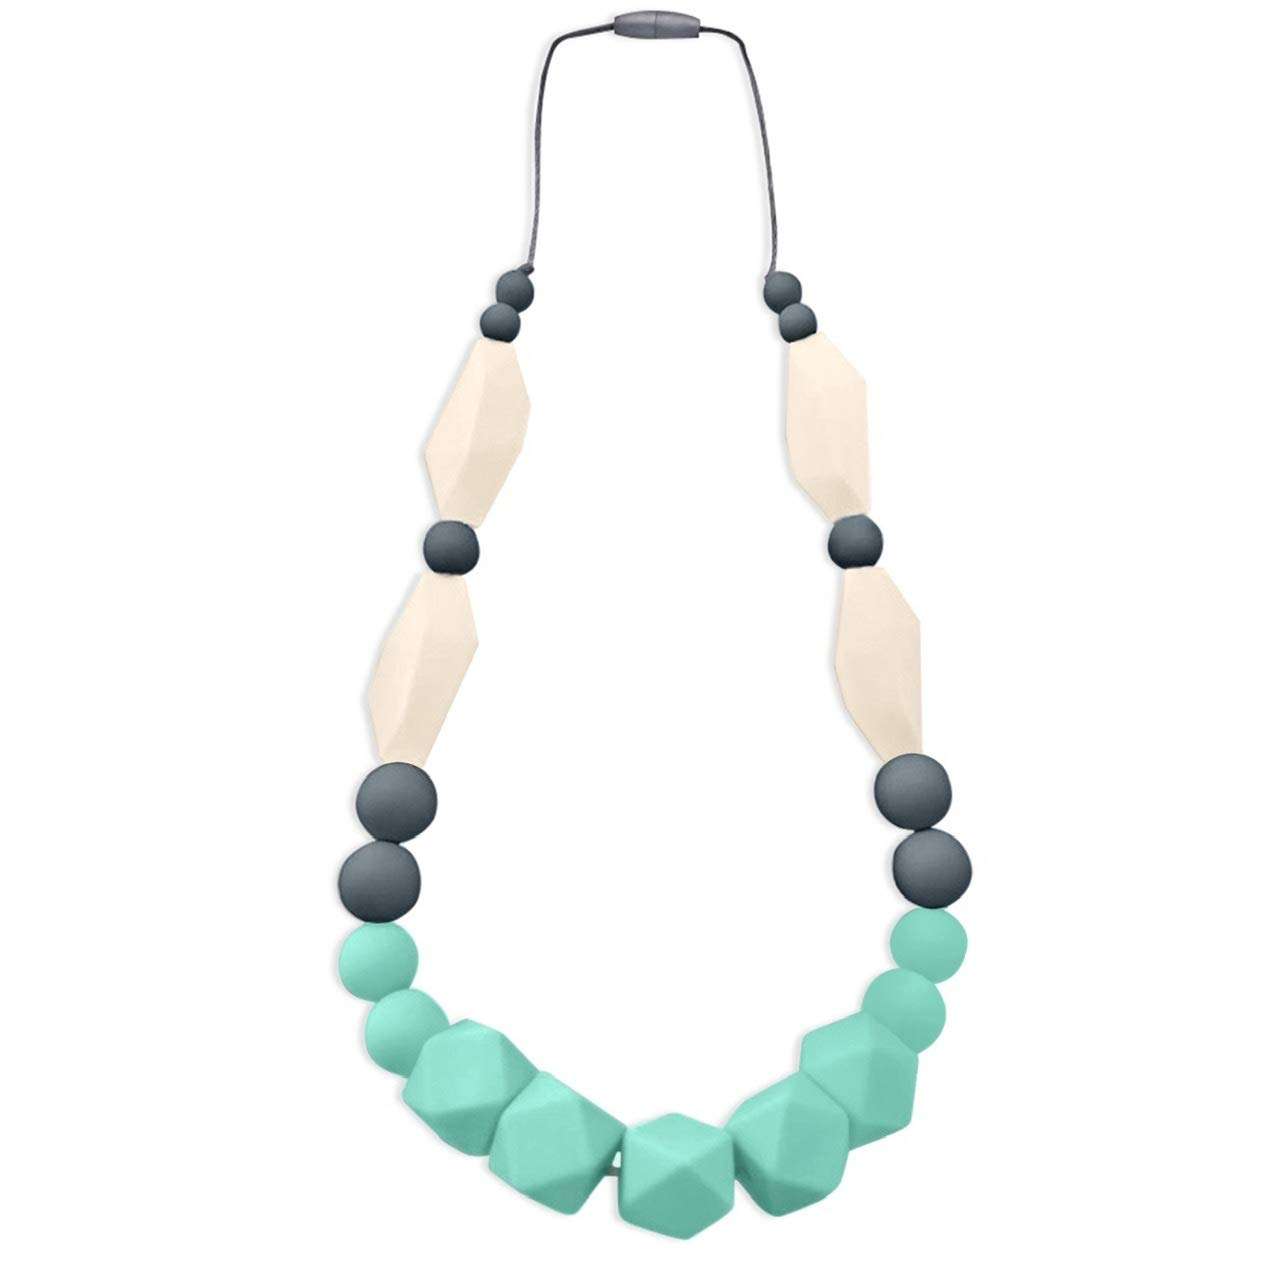 Silicone Teething Necklace for Mom To Wear (Mint,Grey,Ivory)